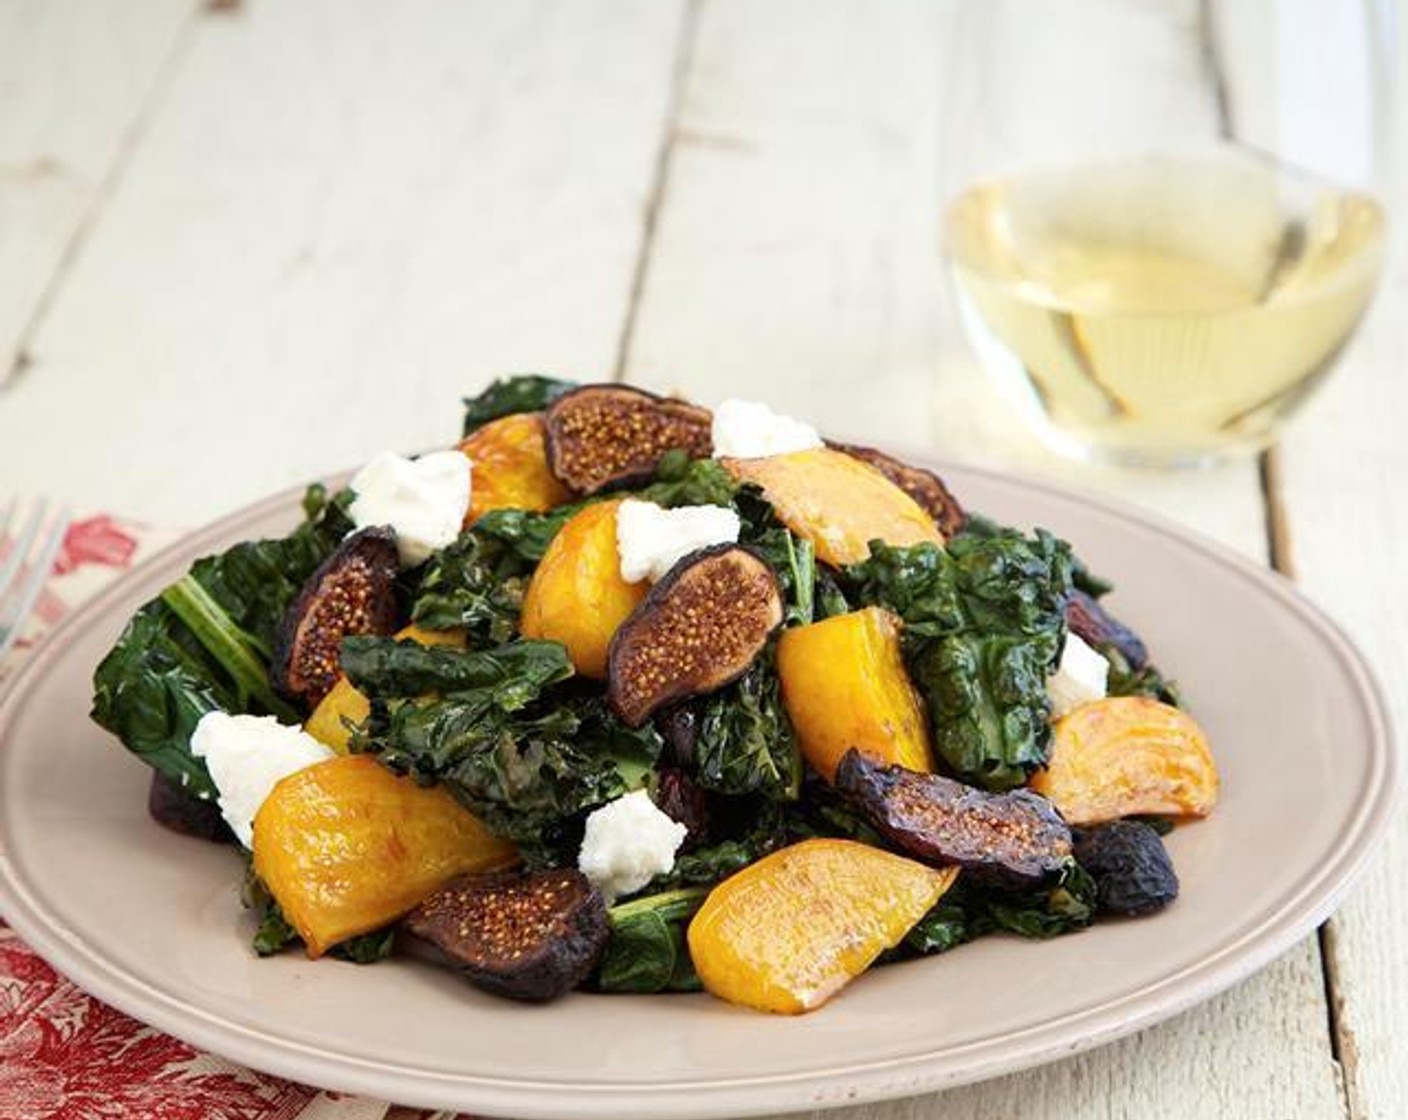 Roasted Kale & Beet Salad with Figs, Goat Cheese